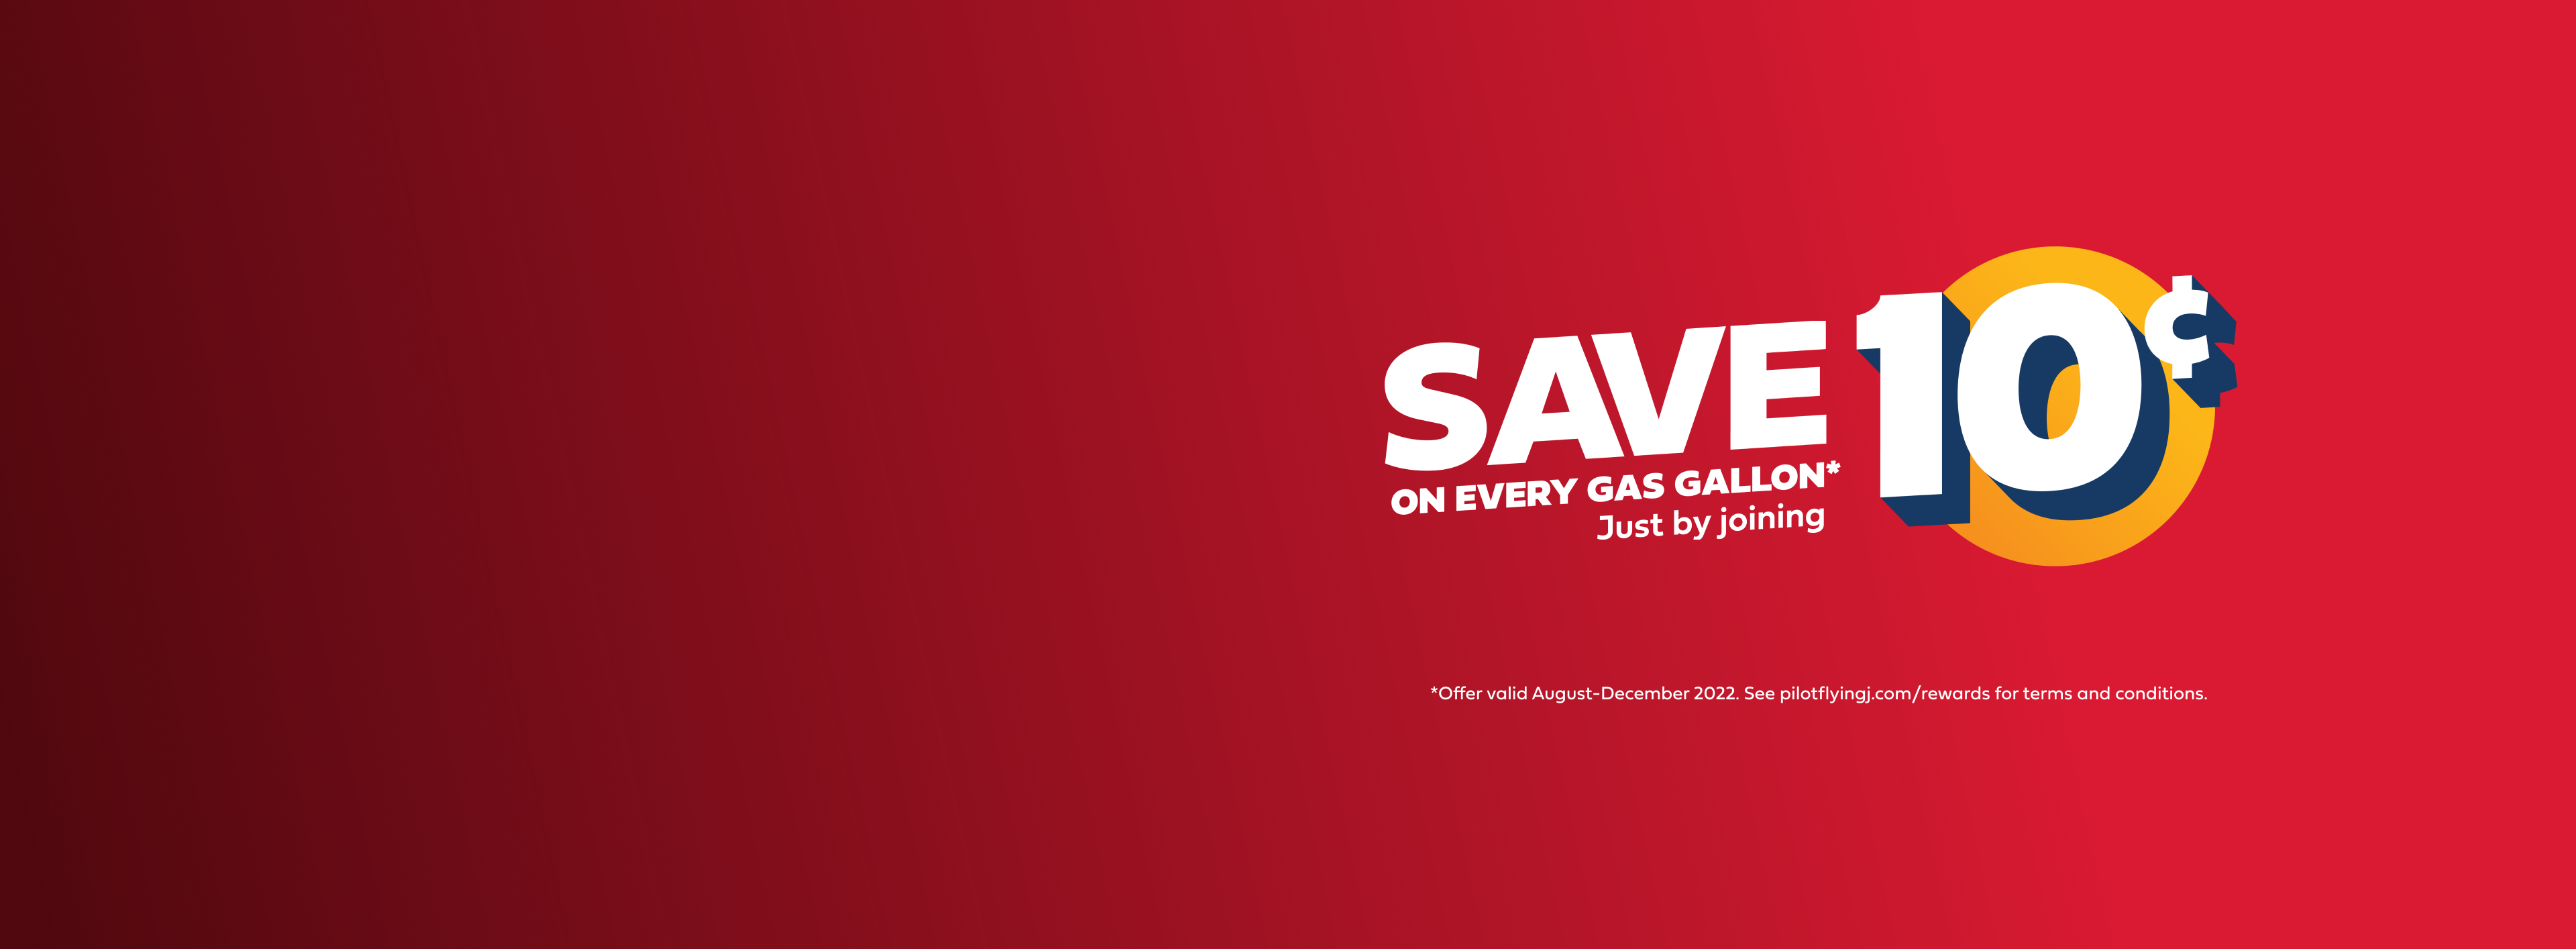 Save 10 cents on every gallon just by joining - See terms